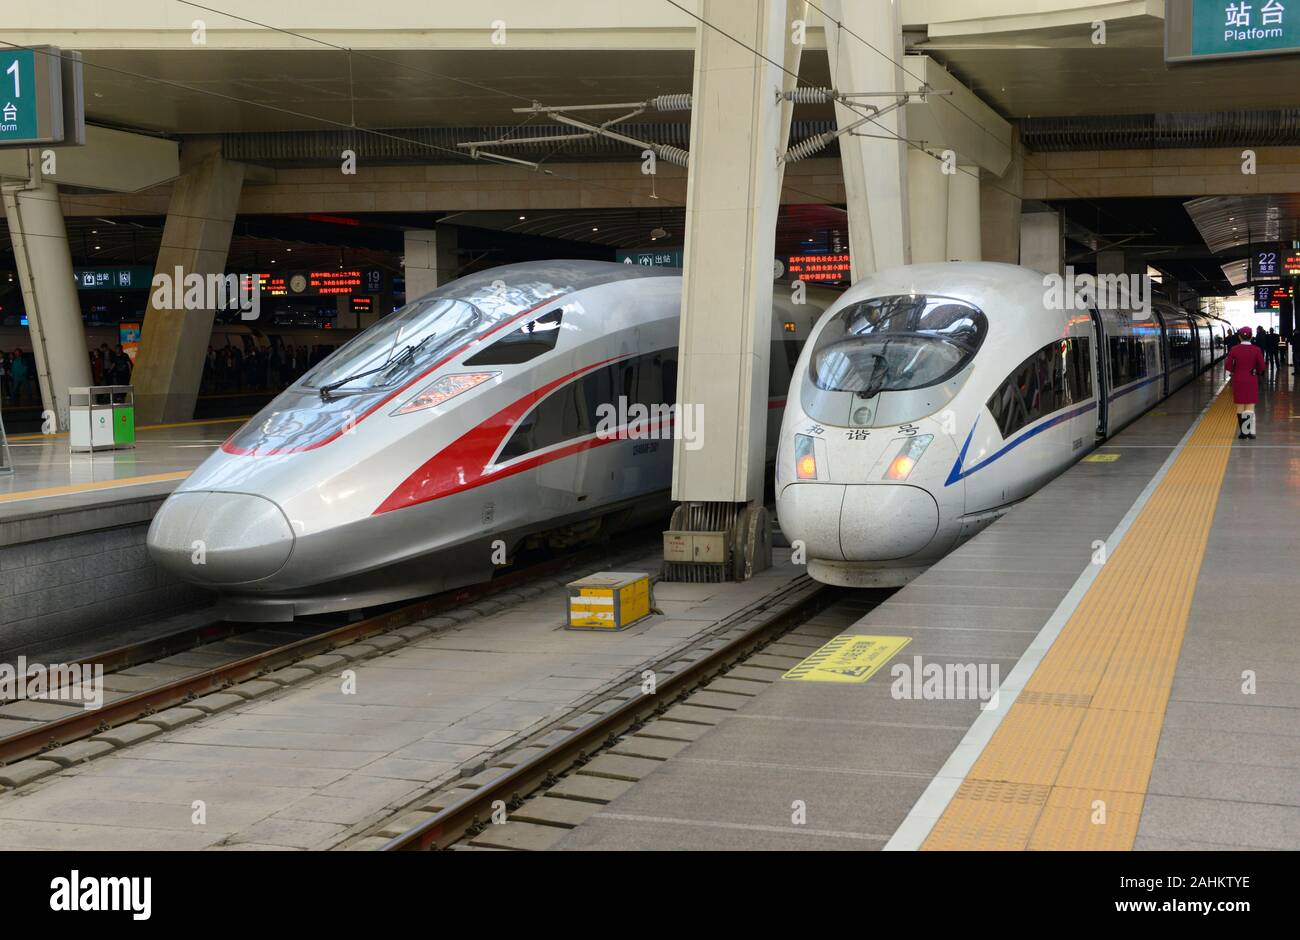 Two high speed bullet trains stand at the platforms of Beijing South railway station with services towards Tianjin, China Stock Photo